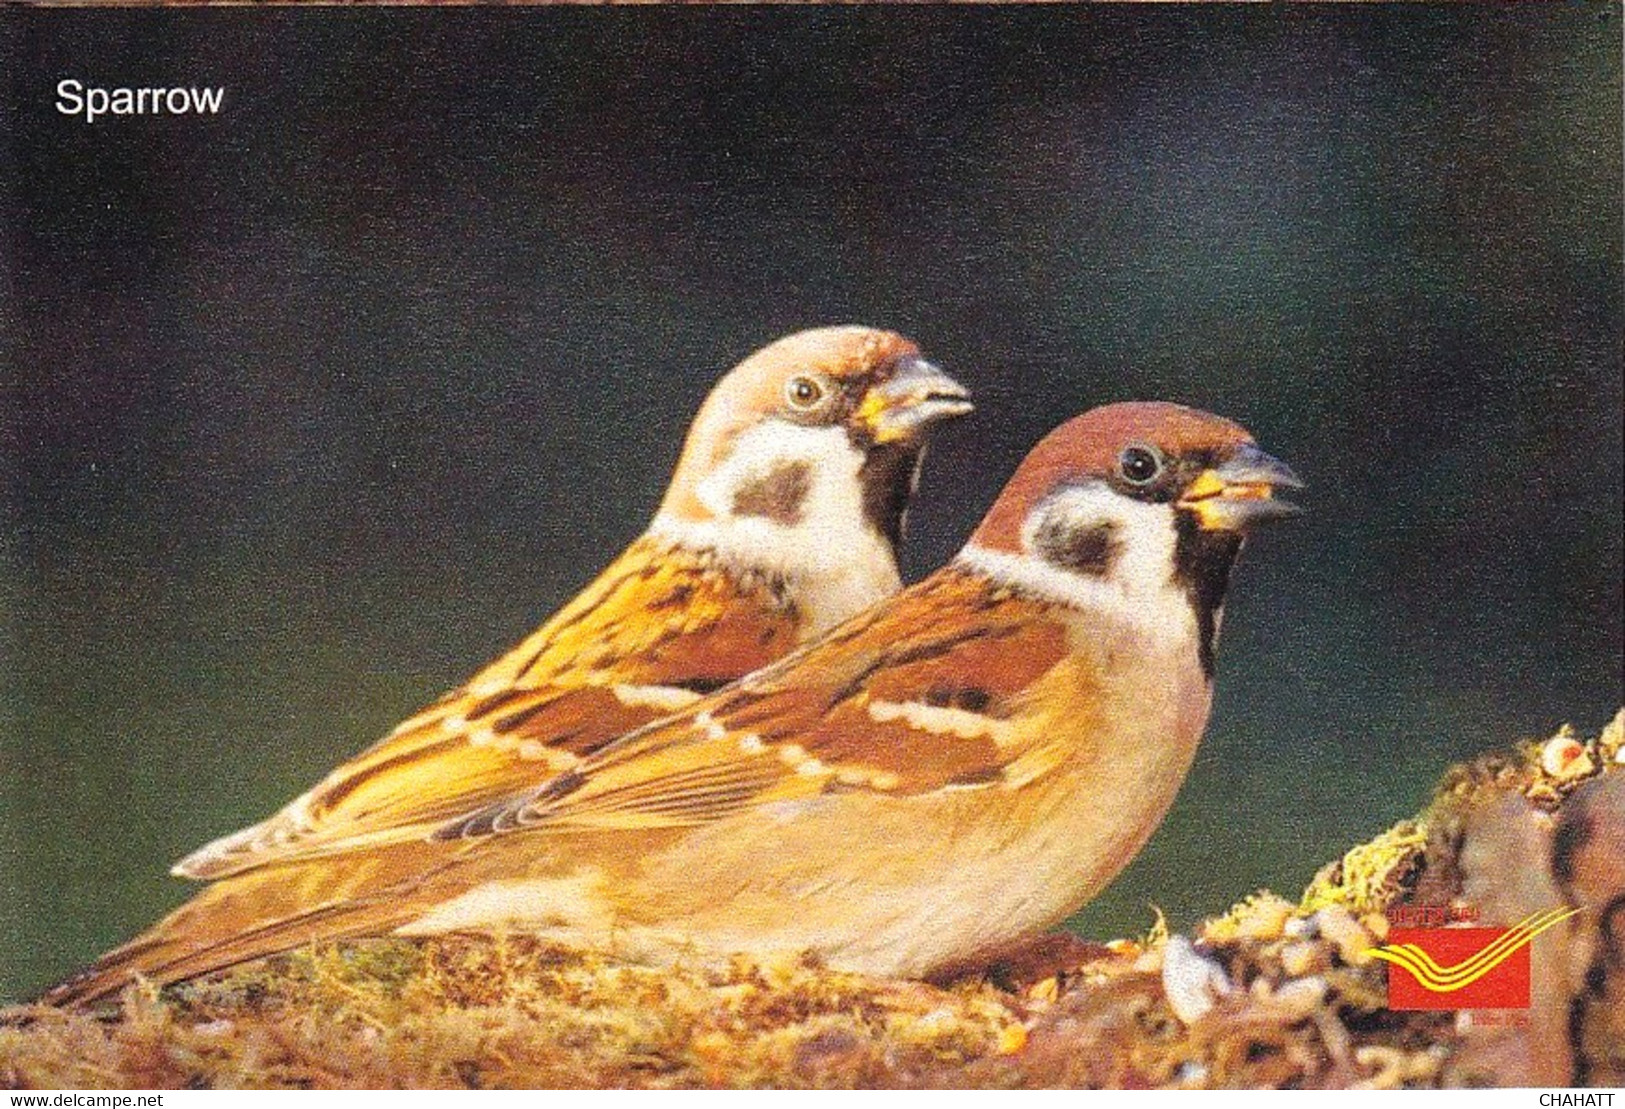 BIRDS- SPARROWS - PPC- GLOSSY PRINT - INDIA POST-OFFICIAL ISSUE- MNH- SCARCE-NMC-203 - Sparrows